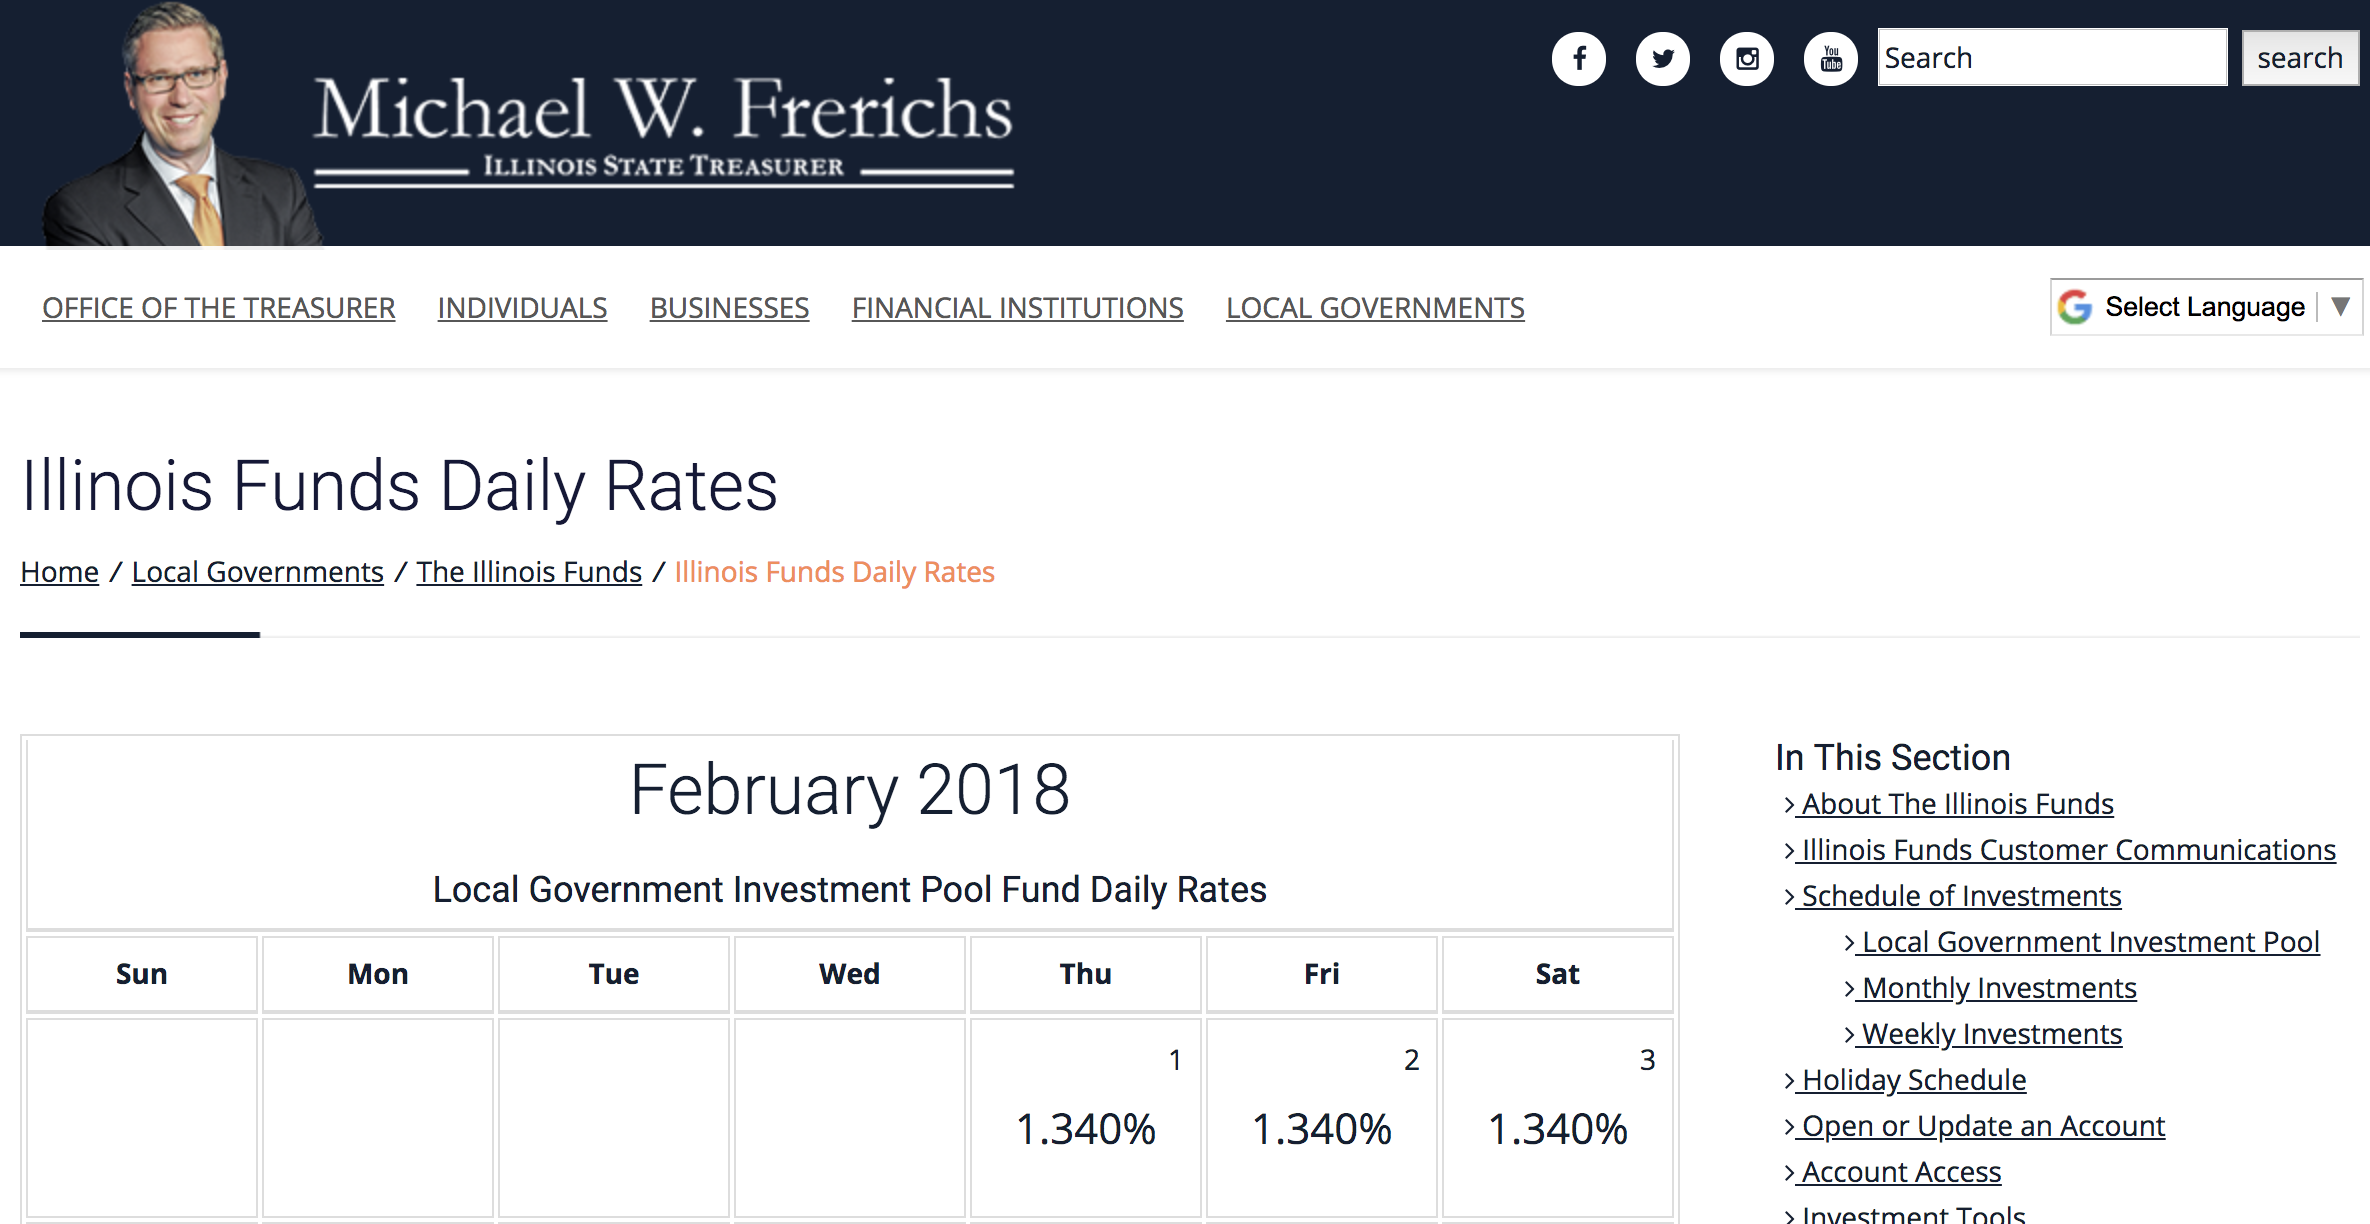 Illinois Funds Daily Rates